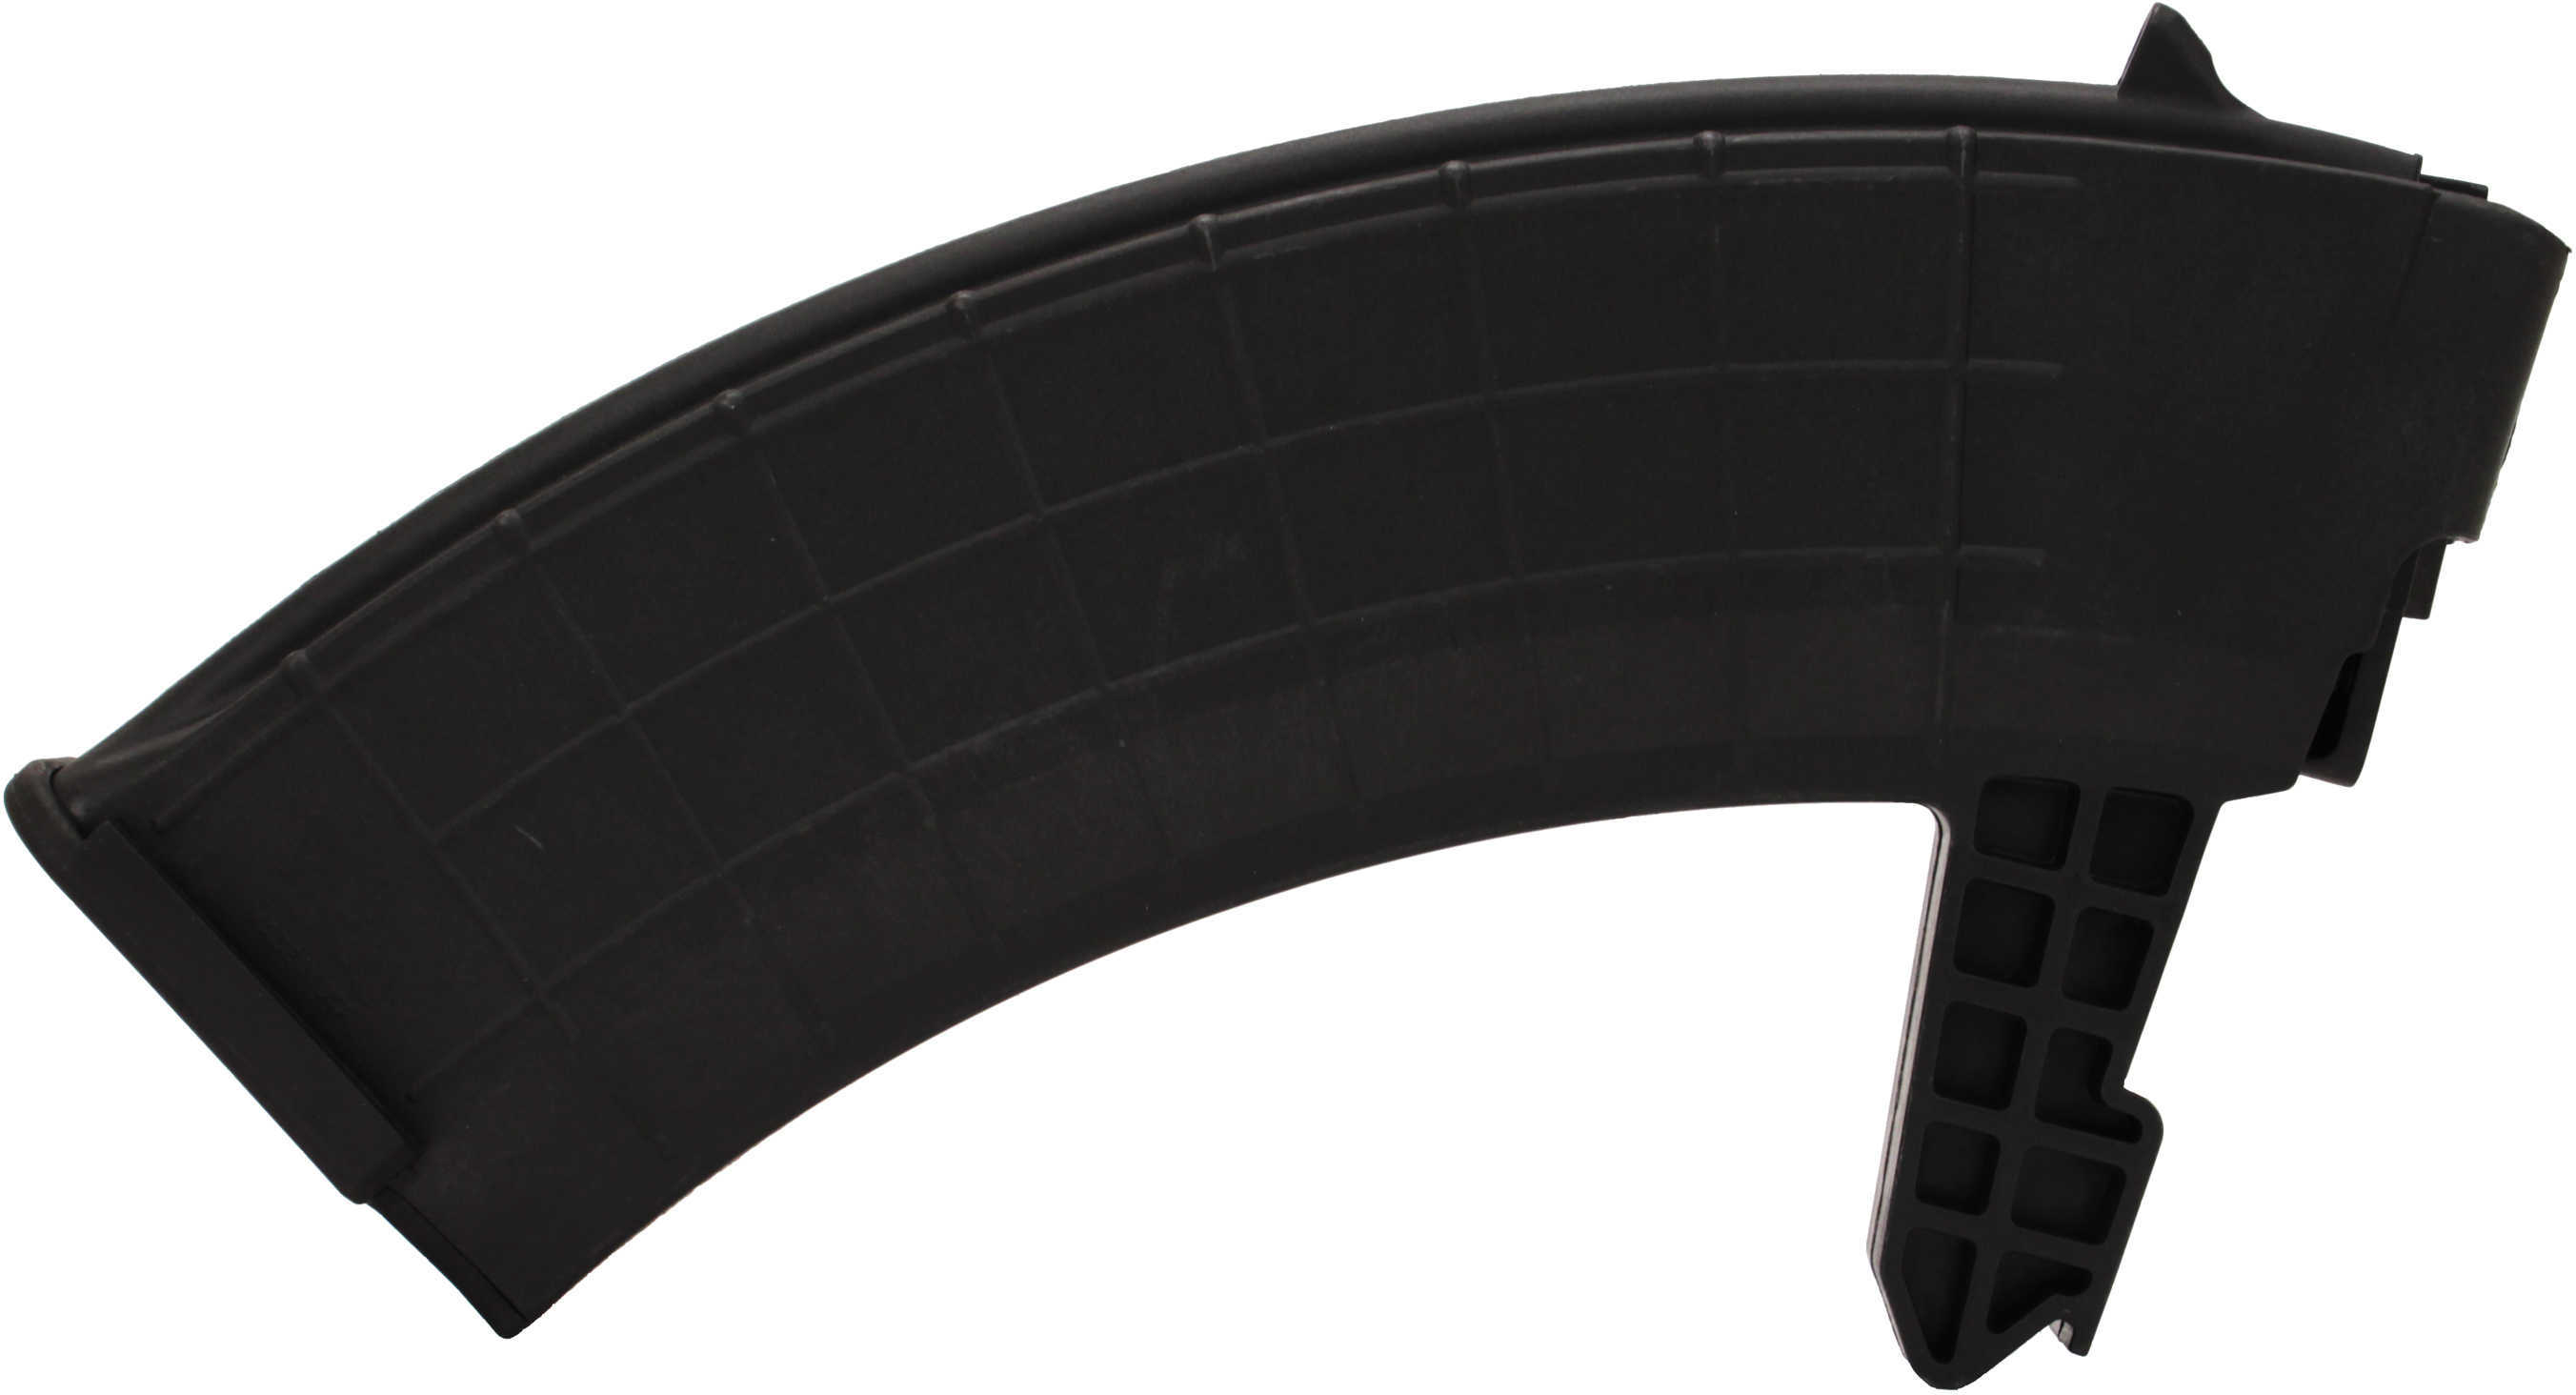 ProMag SKS Magazine 7.62x39mm - Black polymer - 30 Round - Replaces SKS-A1 SKS-A4